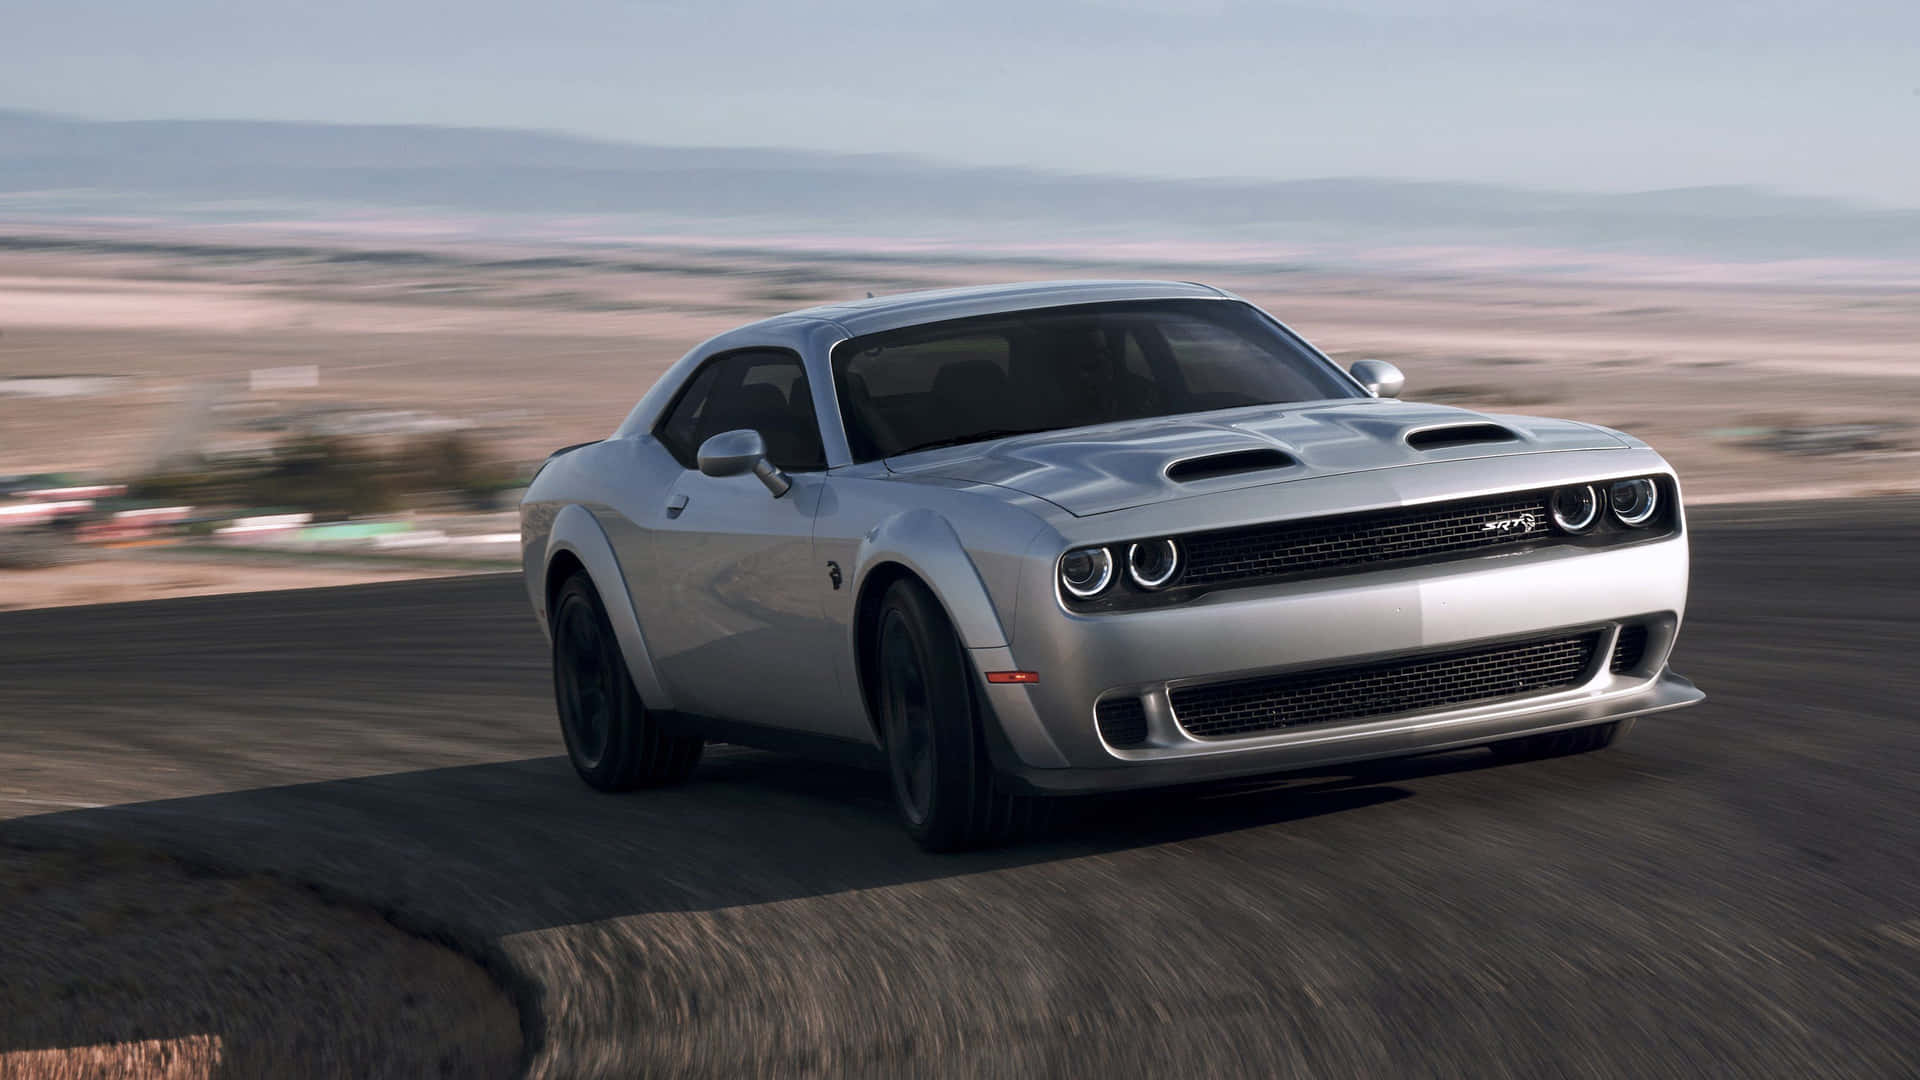 Silverdodge Hellcat Would Be 